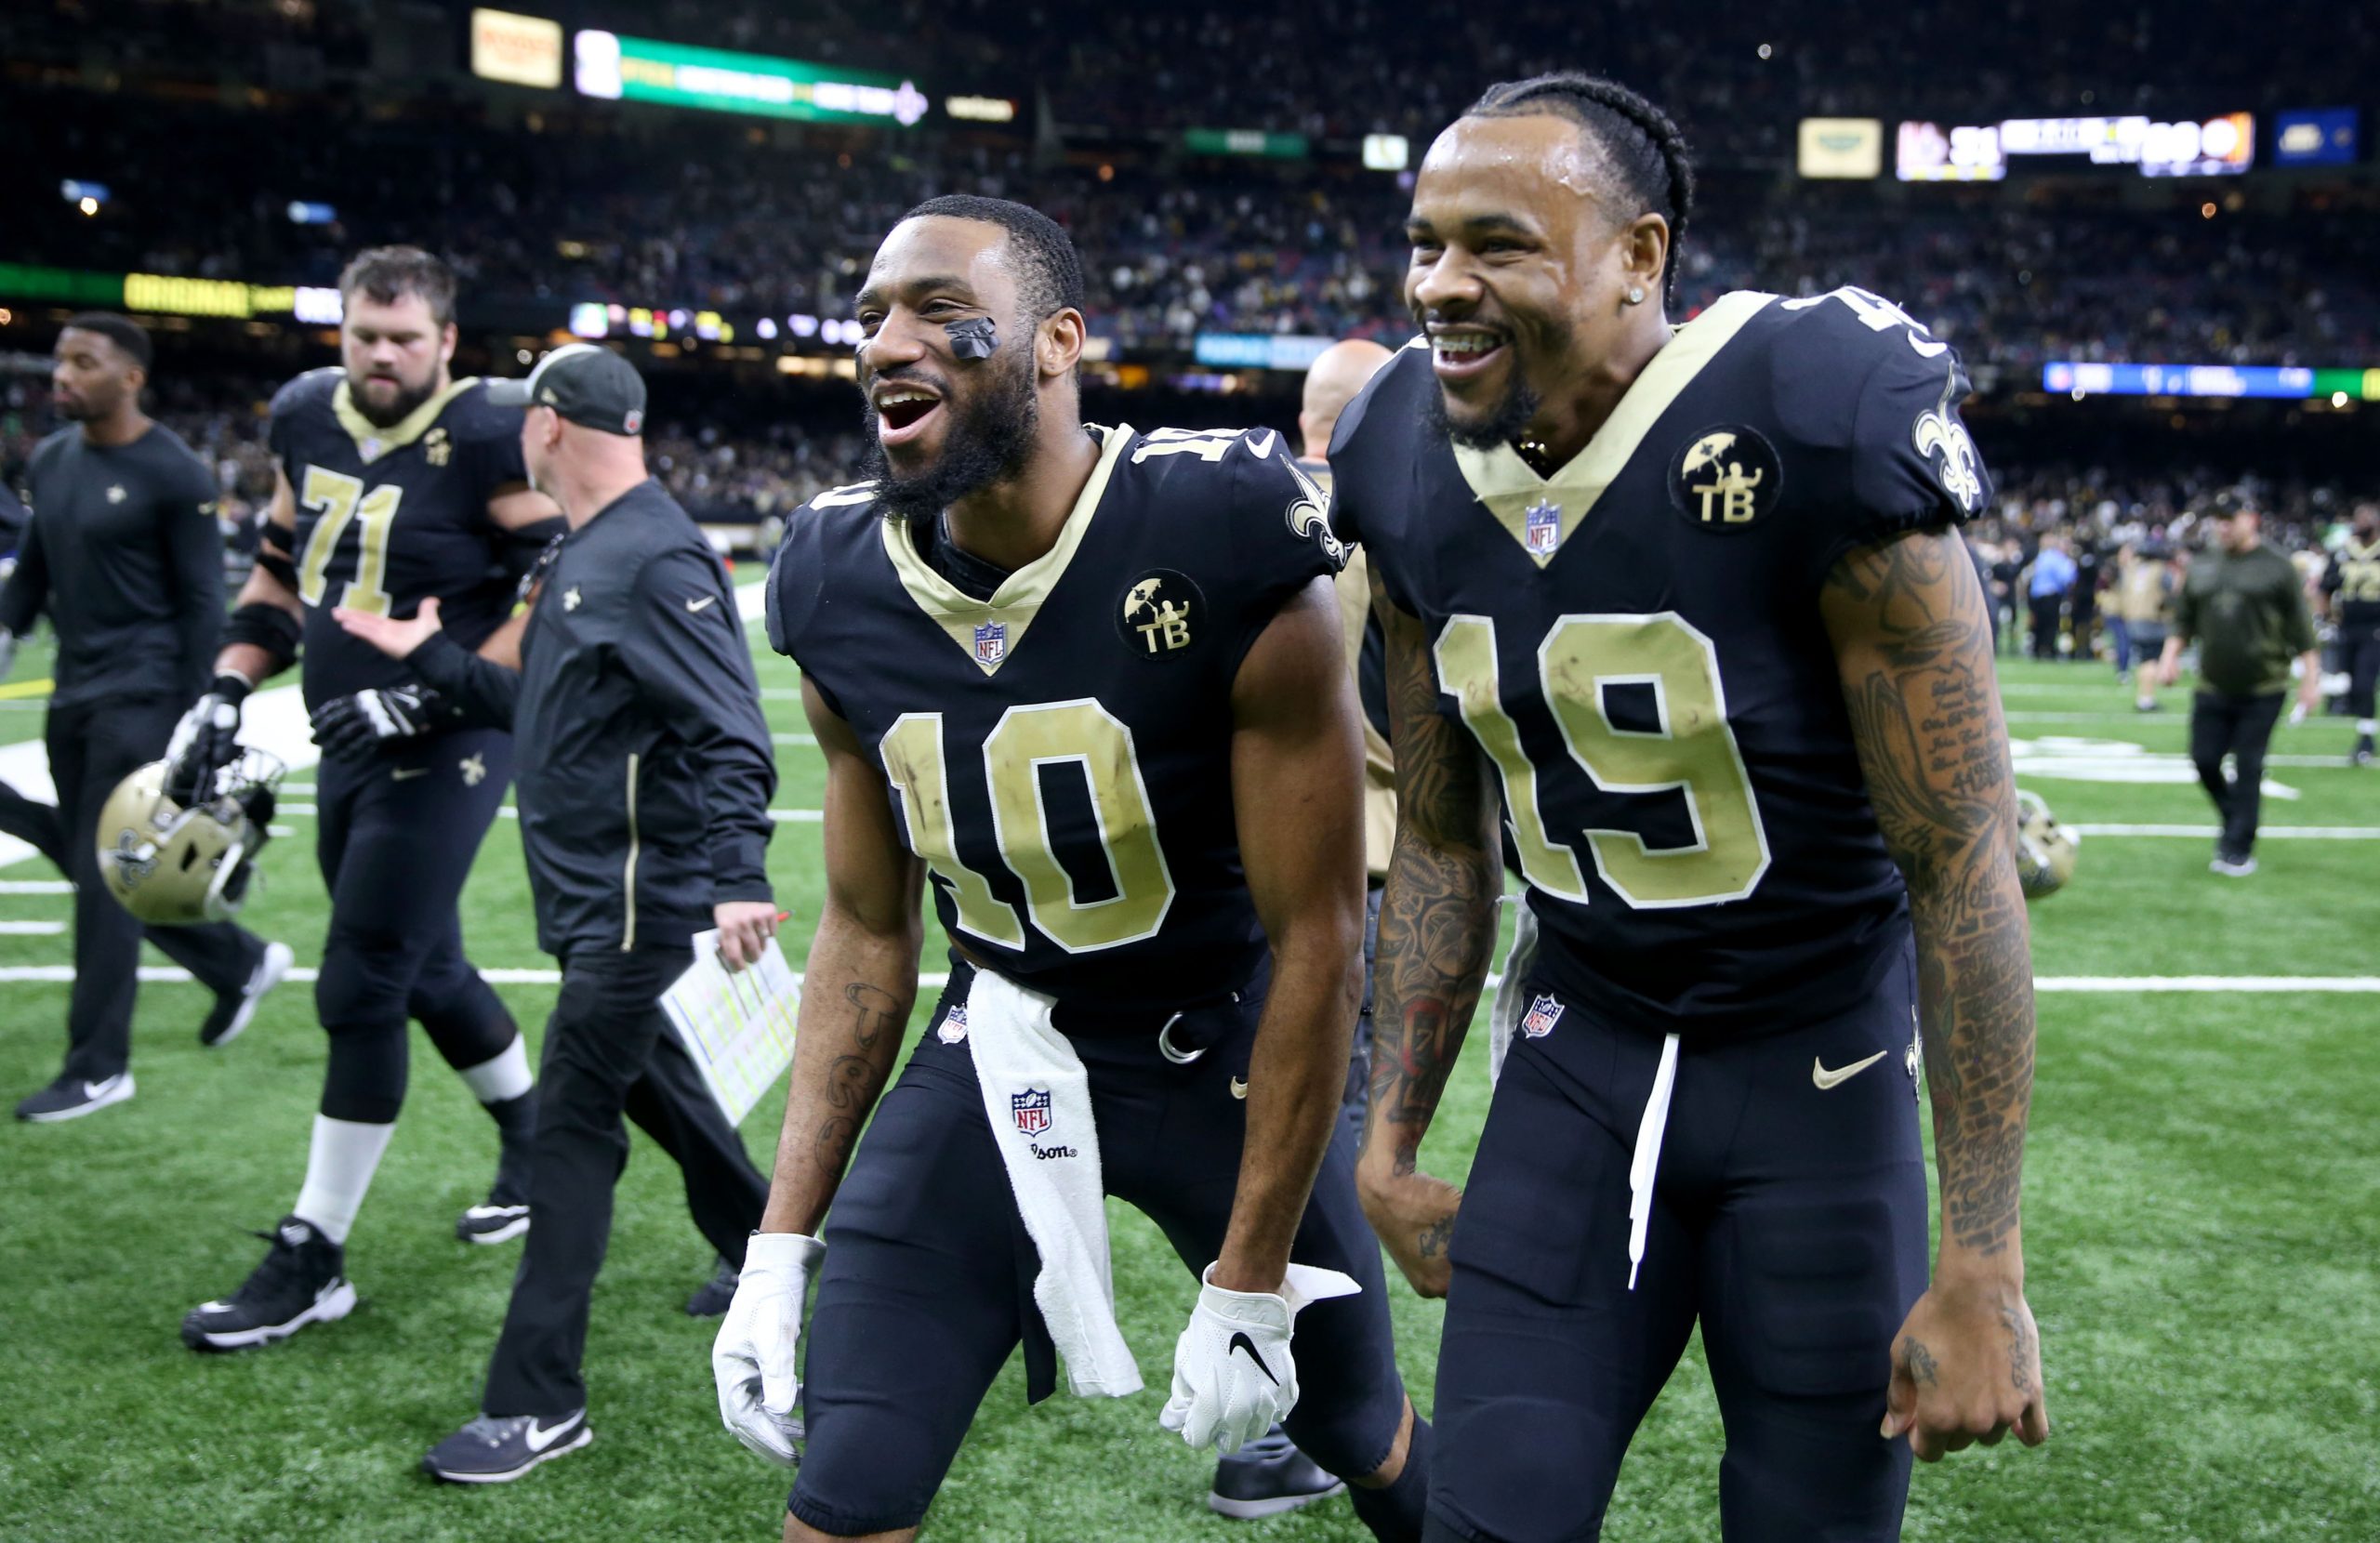 NFL: Pittsburgh Steelers at New Orleans Saints